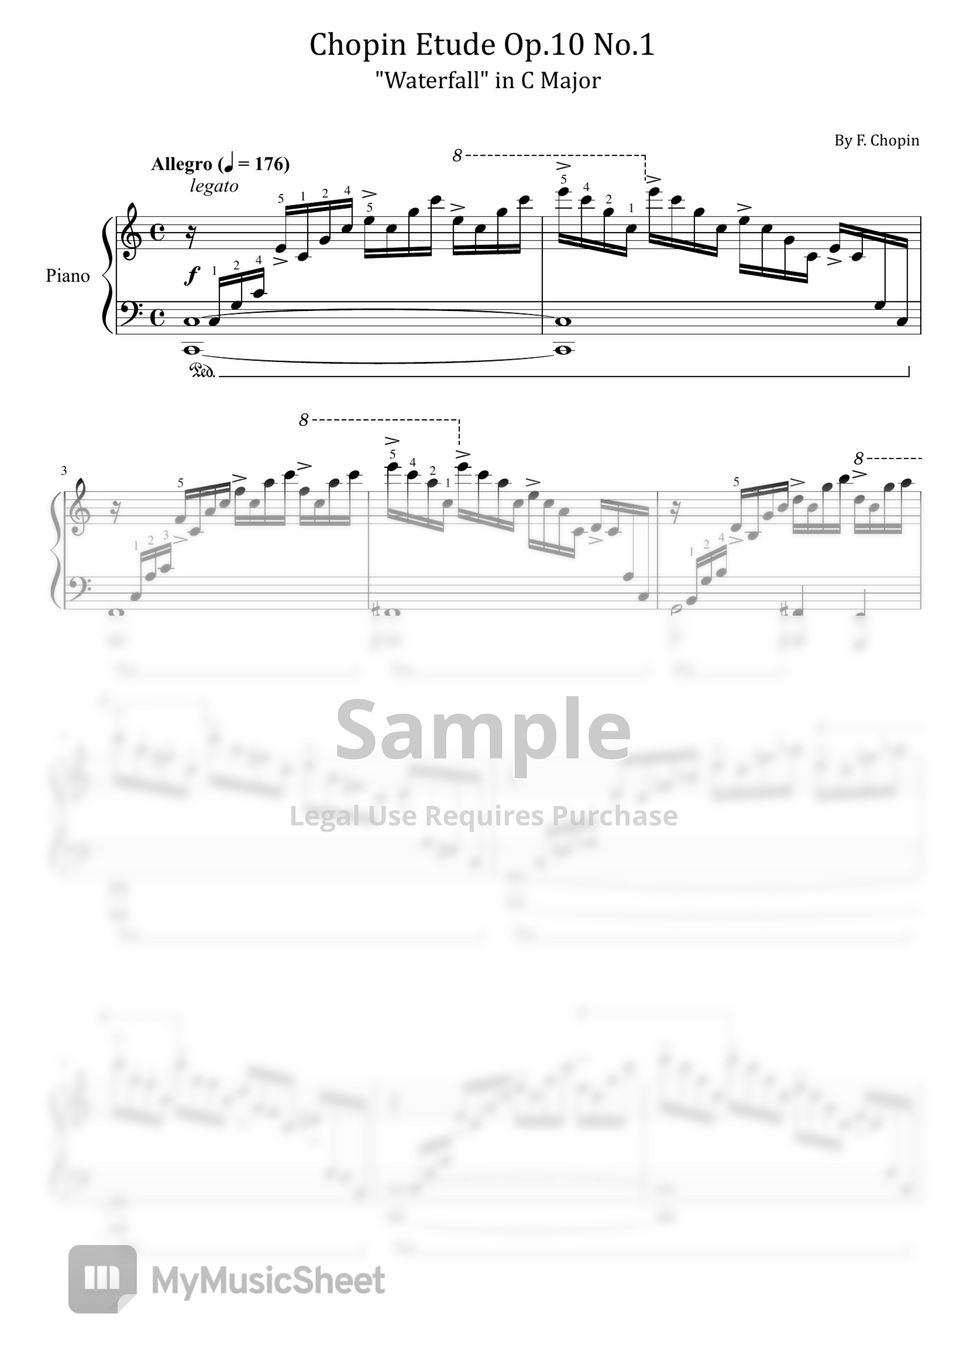 F. Chopin - Chopin Etude Op.10 No.1 "Waterfall" (in C Major -  (With Finger Number),Original Version) by poon